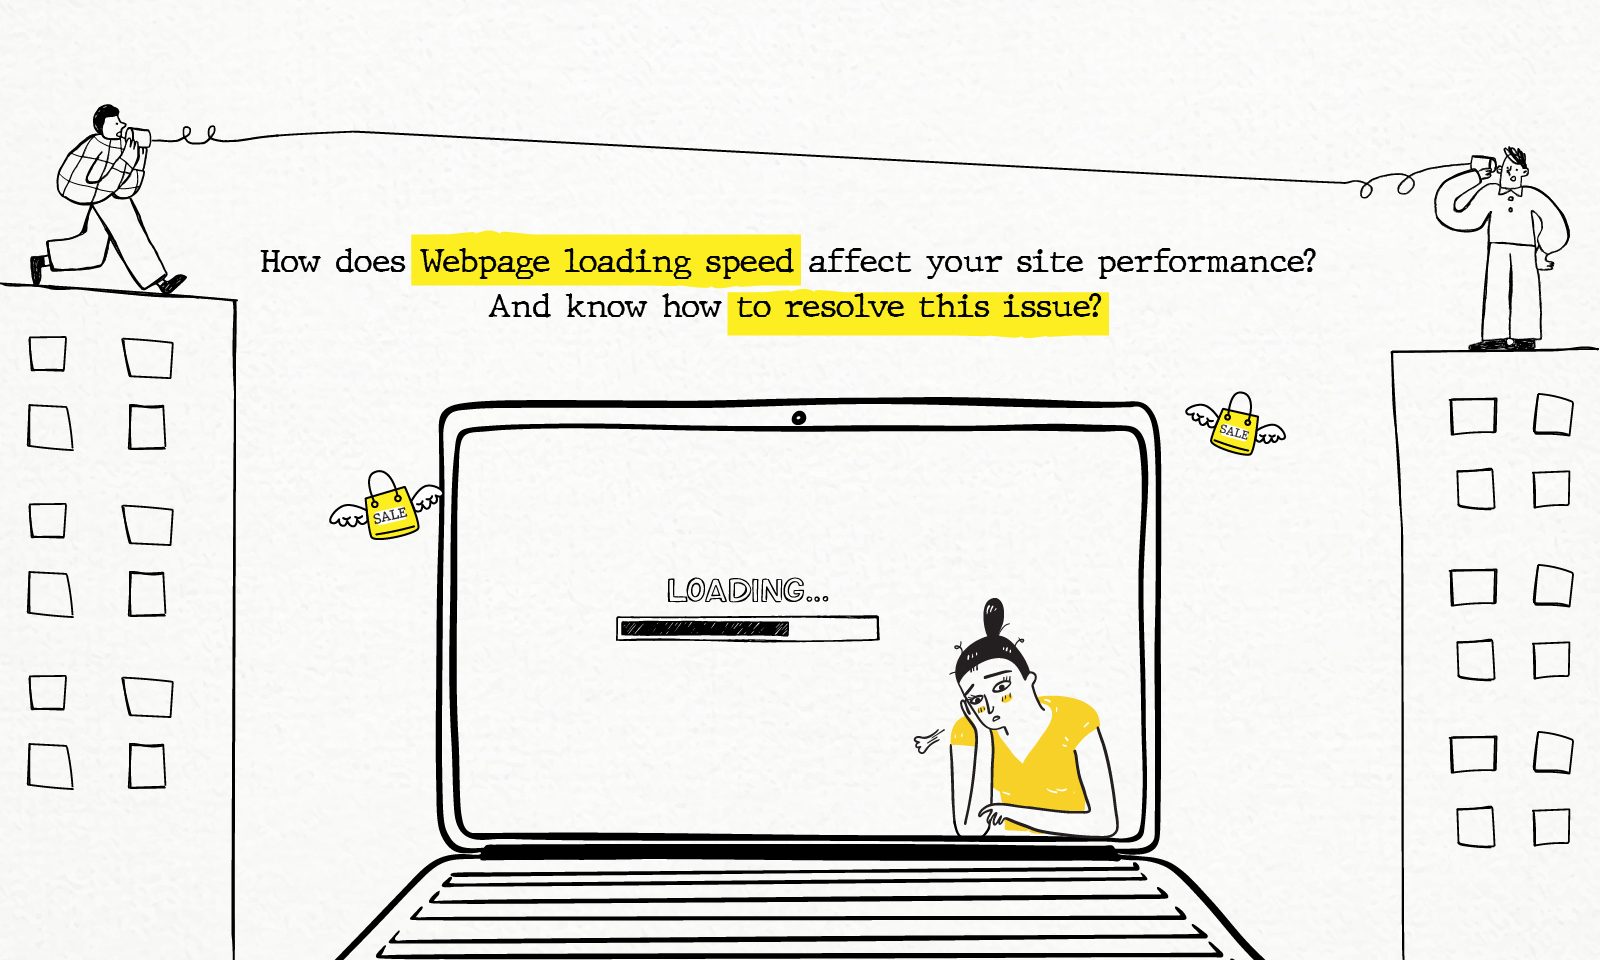 How does Webpage loading speed affect your site performance?